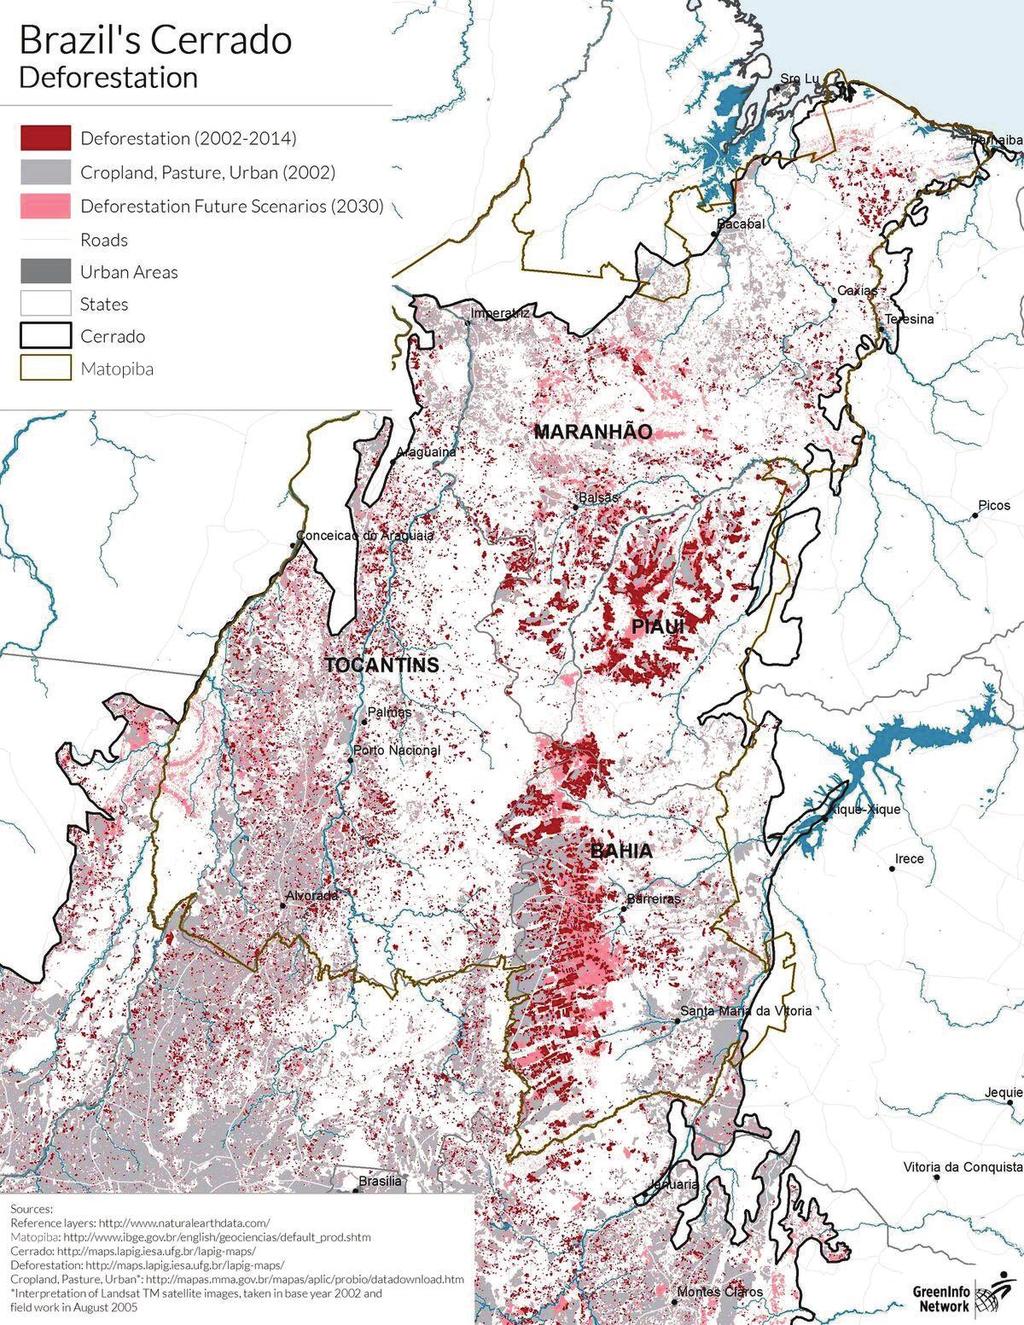 Projected Future Deforestation One analysis from Ferreira et al.